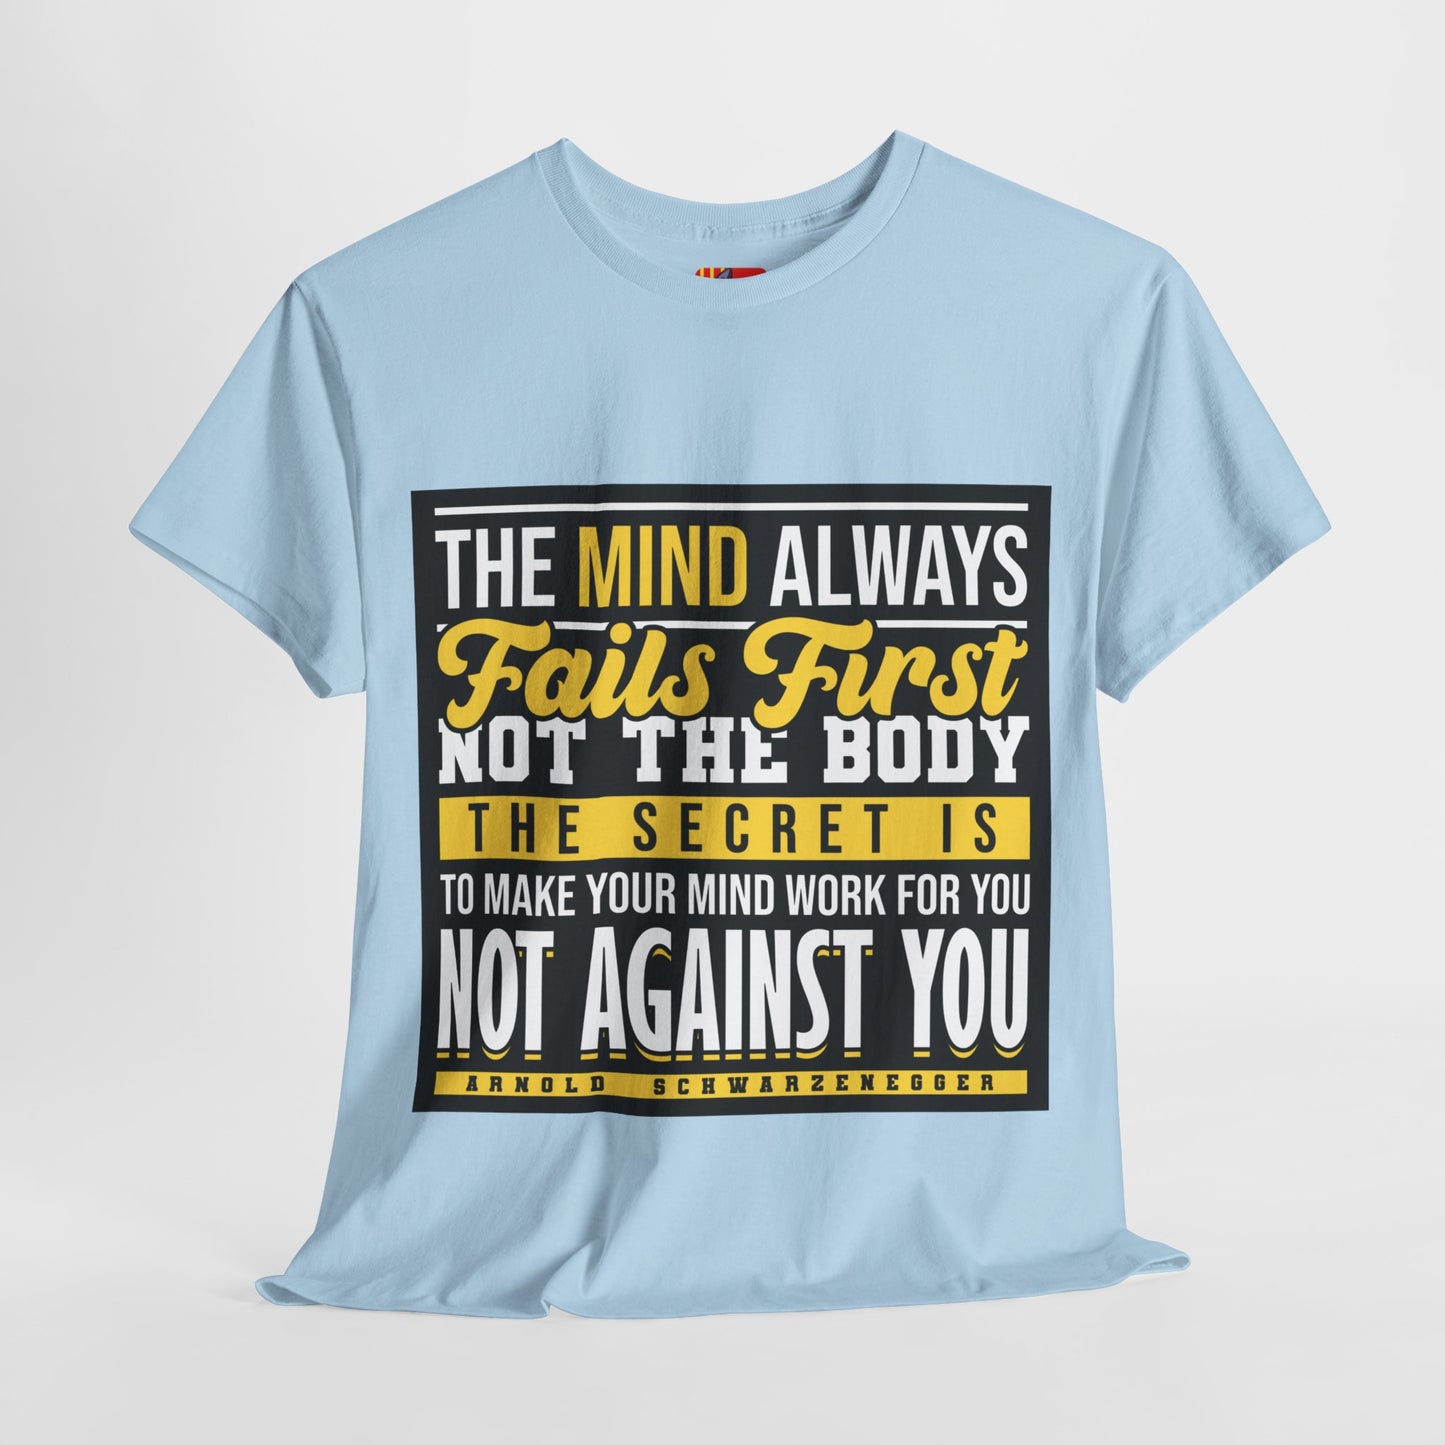 The Positive Mindset T-Shirt: I will always stay hungry never satisfied Arnold Schwarzenegger